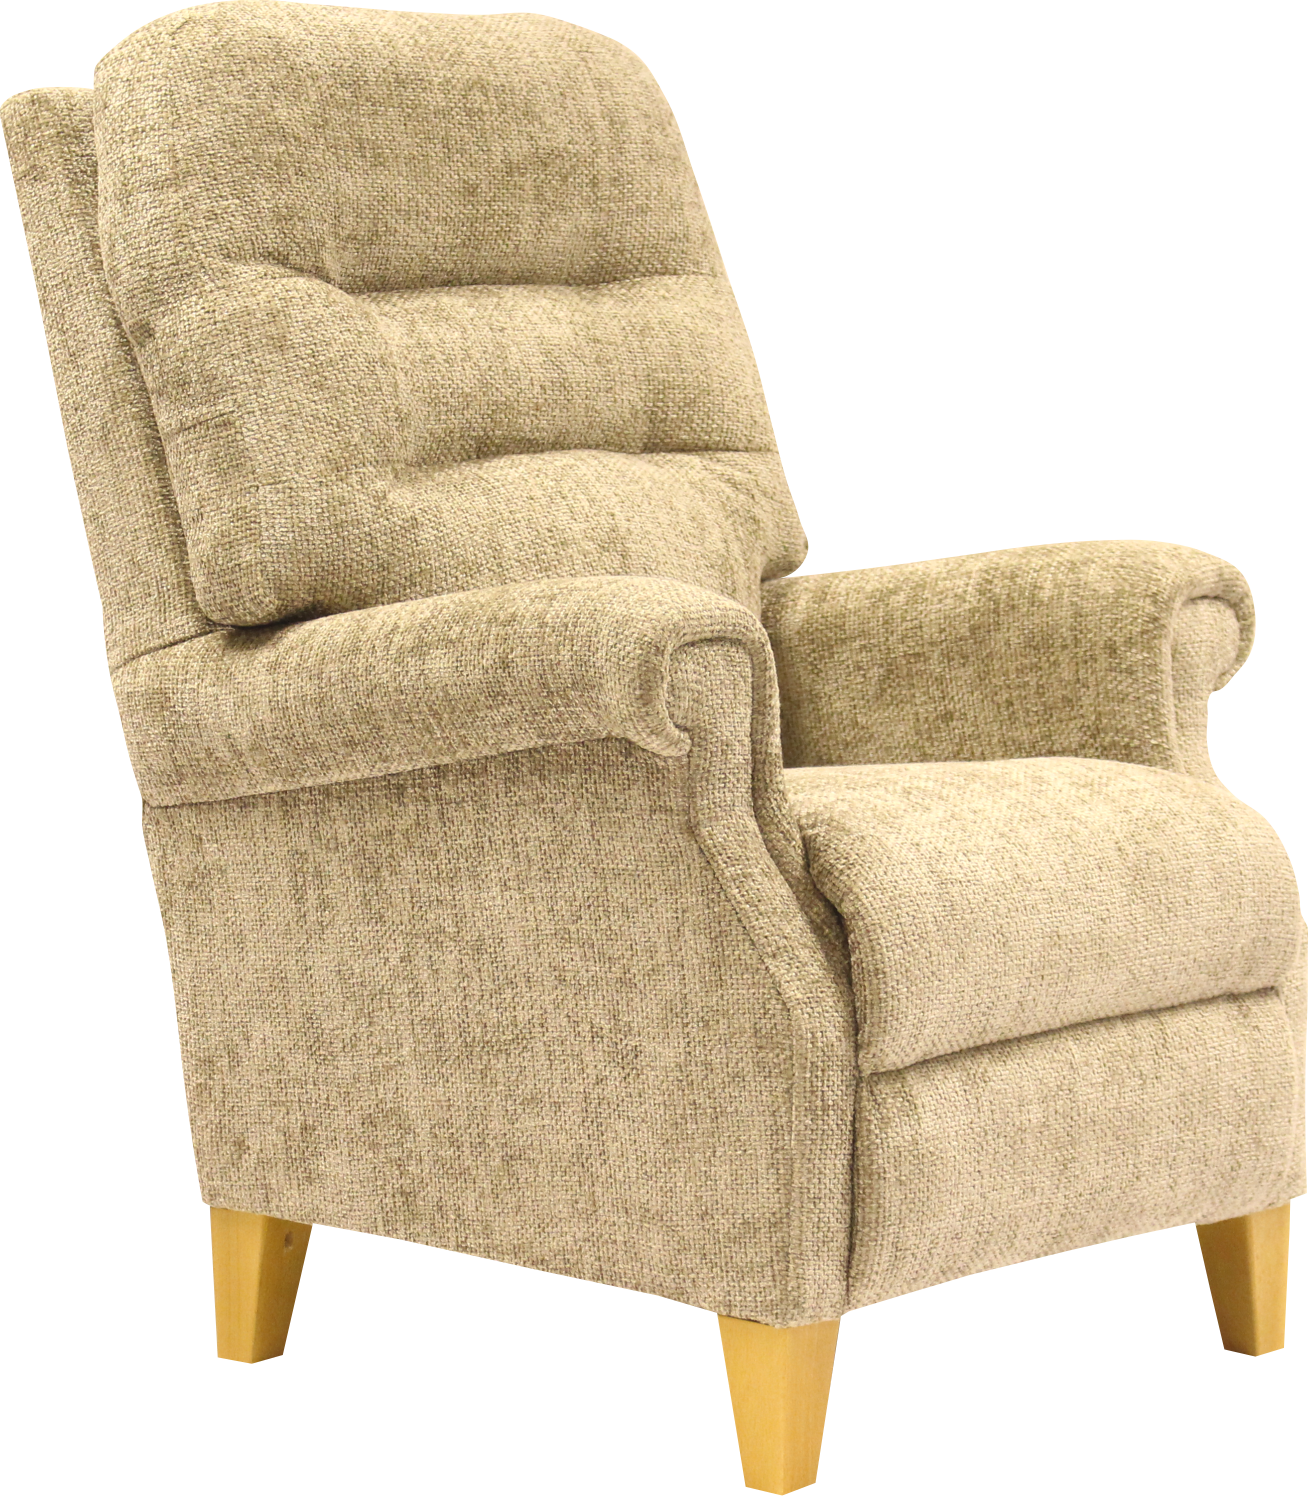 Turford Upholstered Arm Chair Standard